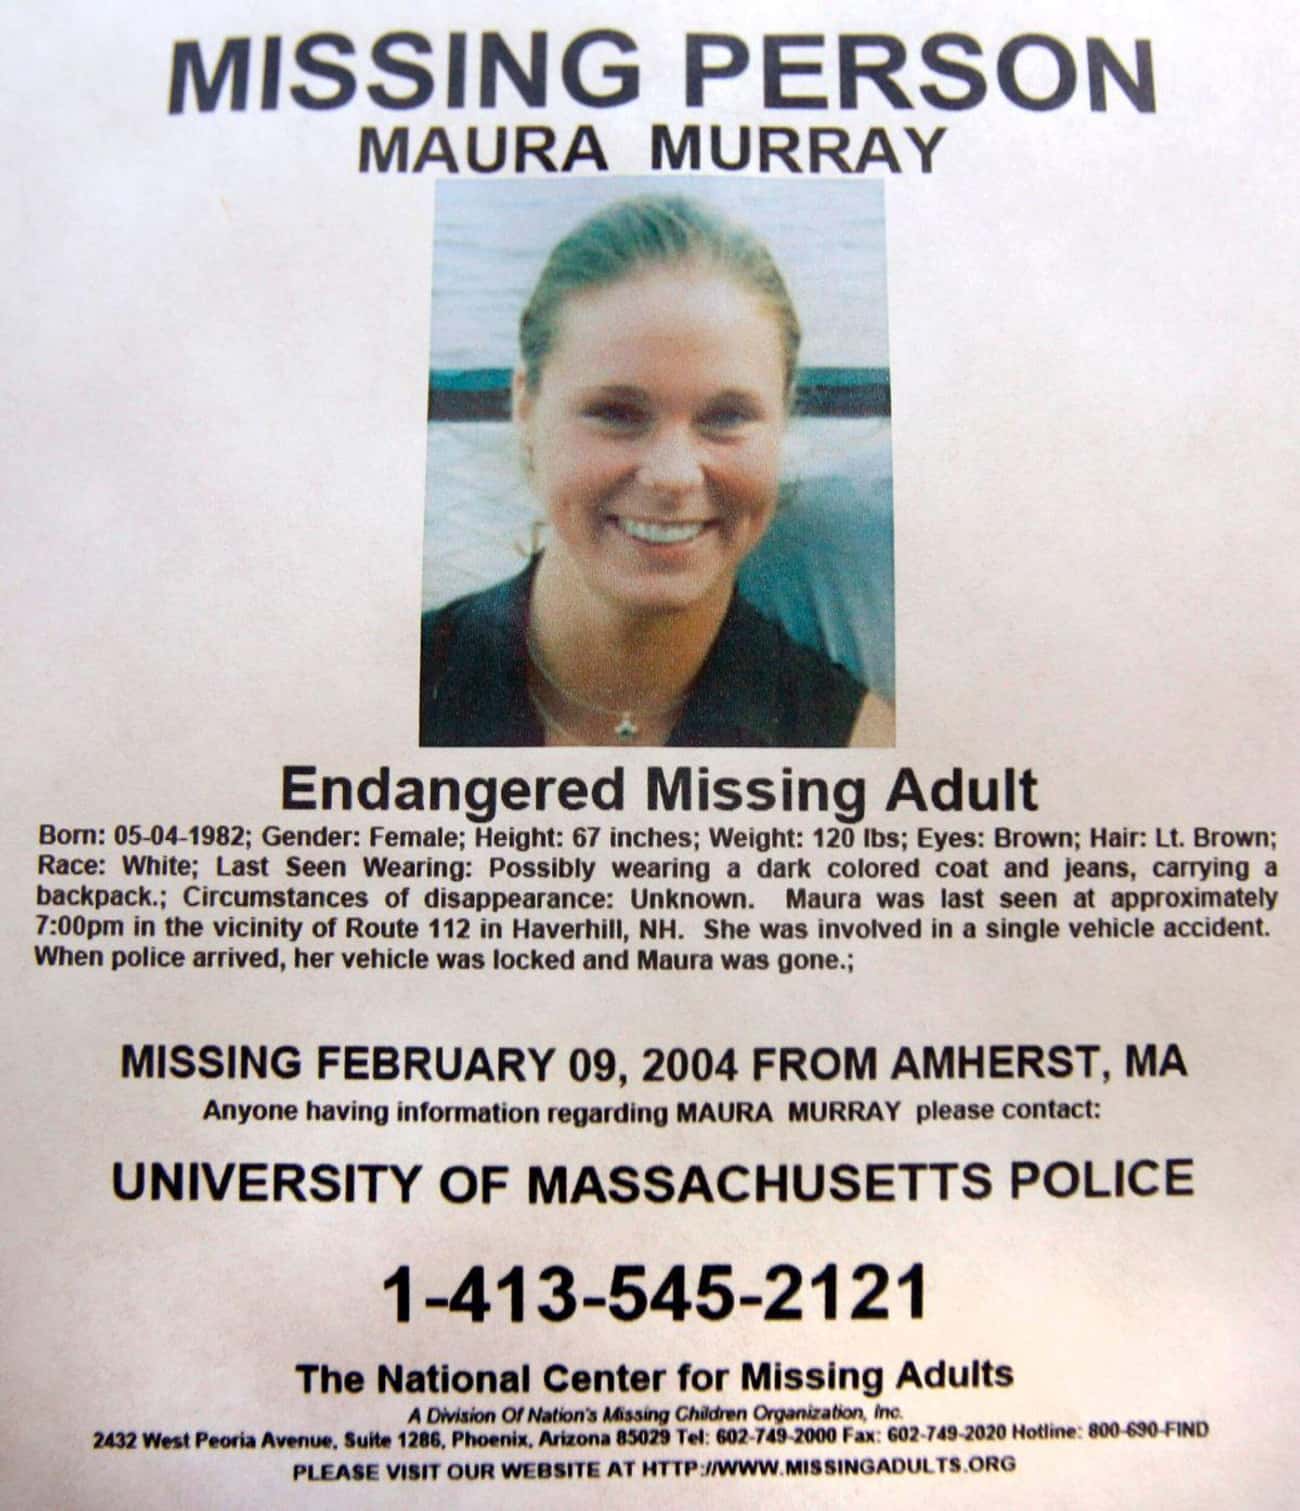 Maura Murray Disappeared After A Car Accident On February 9, 2004